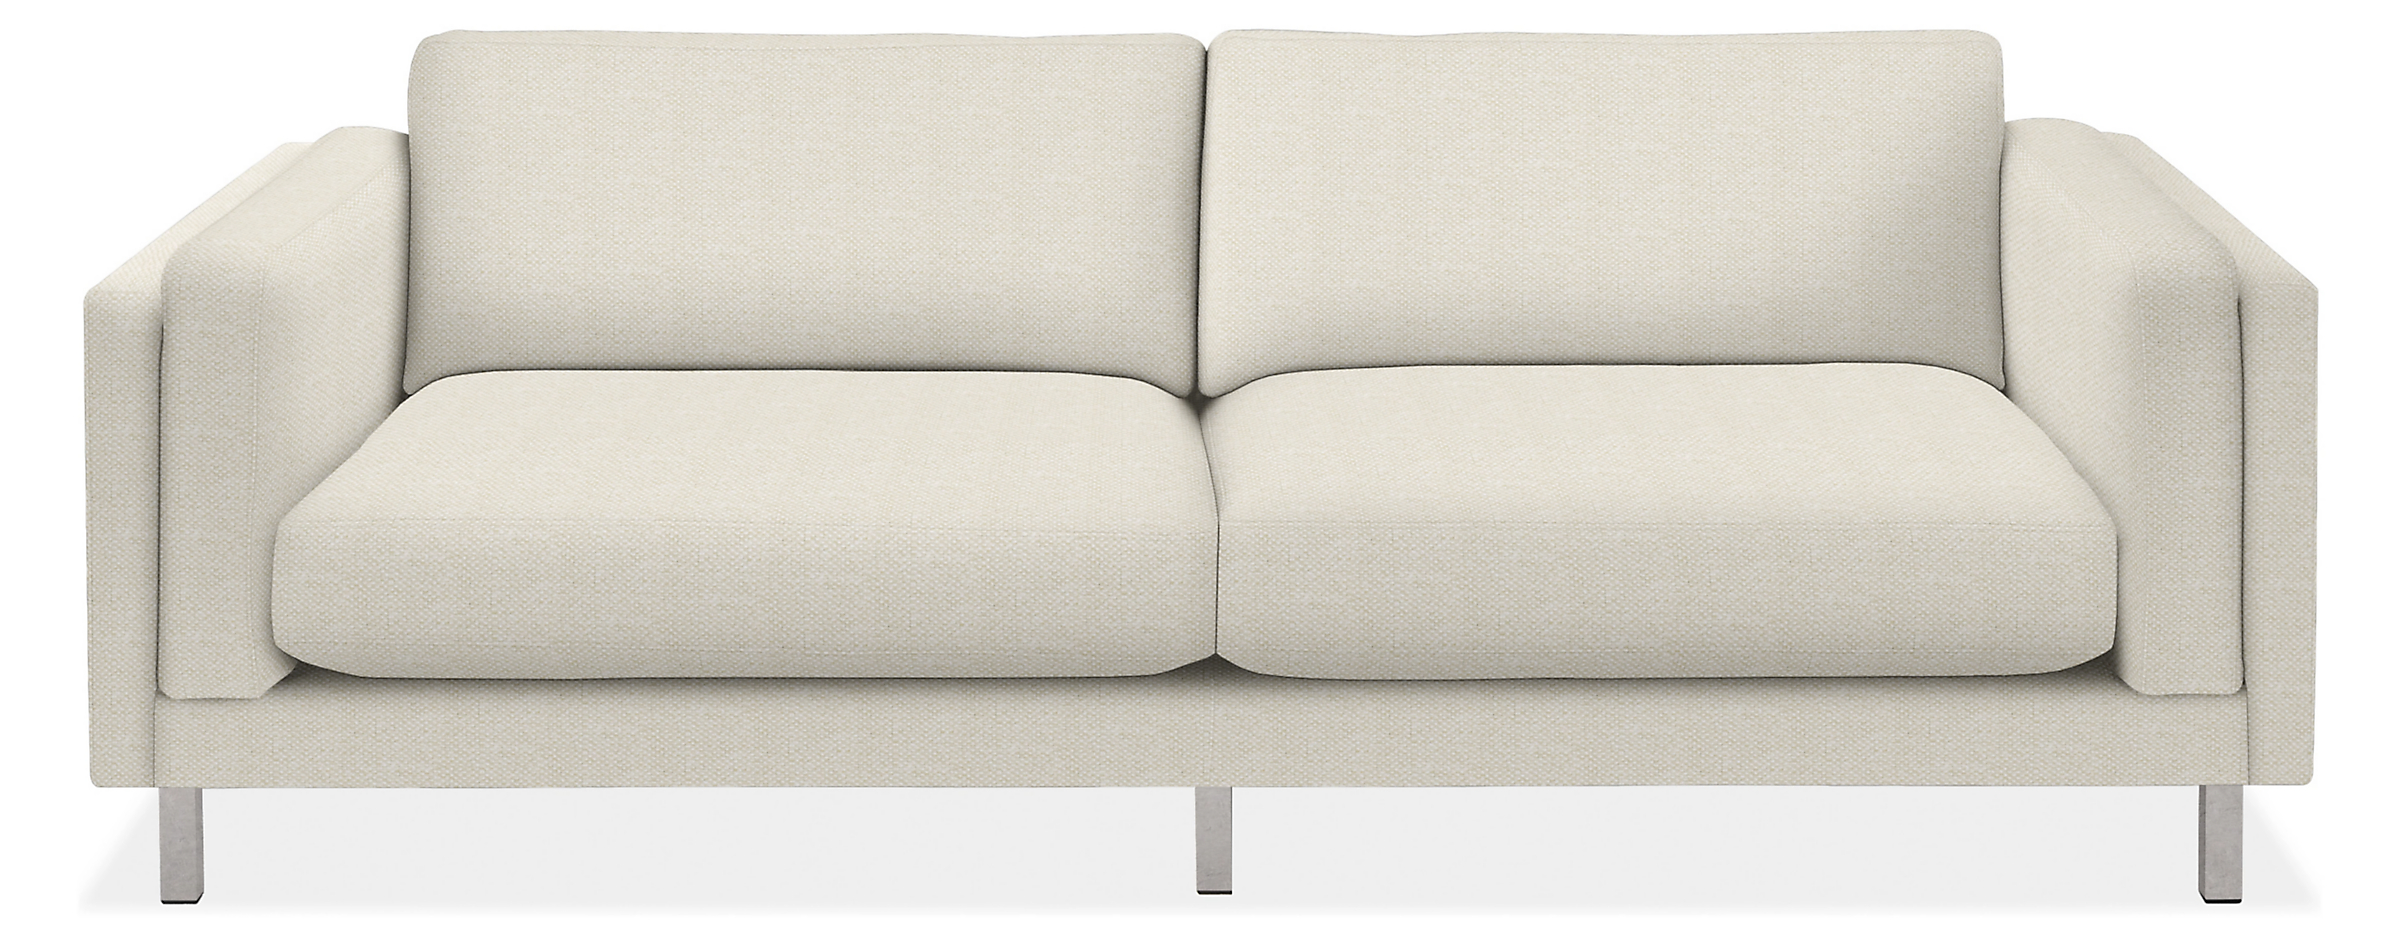 Cade 91" Sofa in Arin Ivory with Stainless Steel Legs